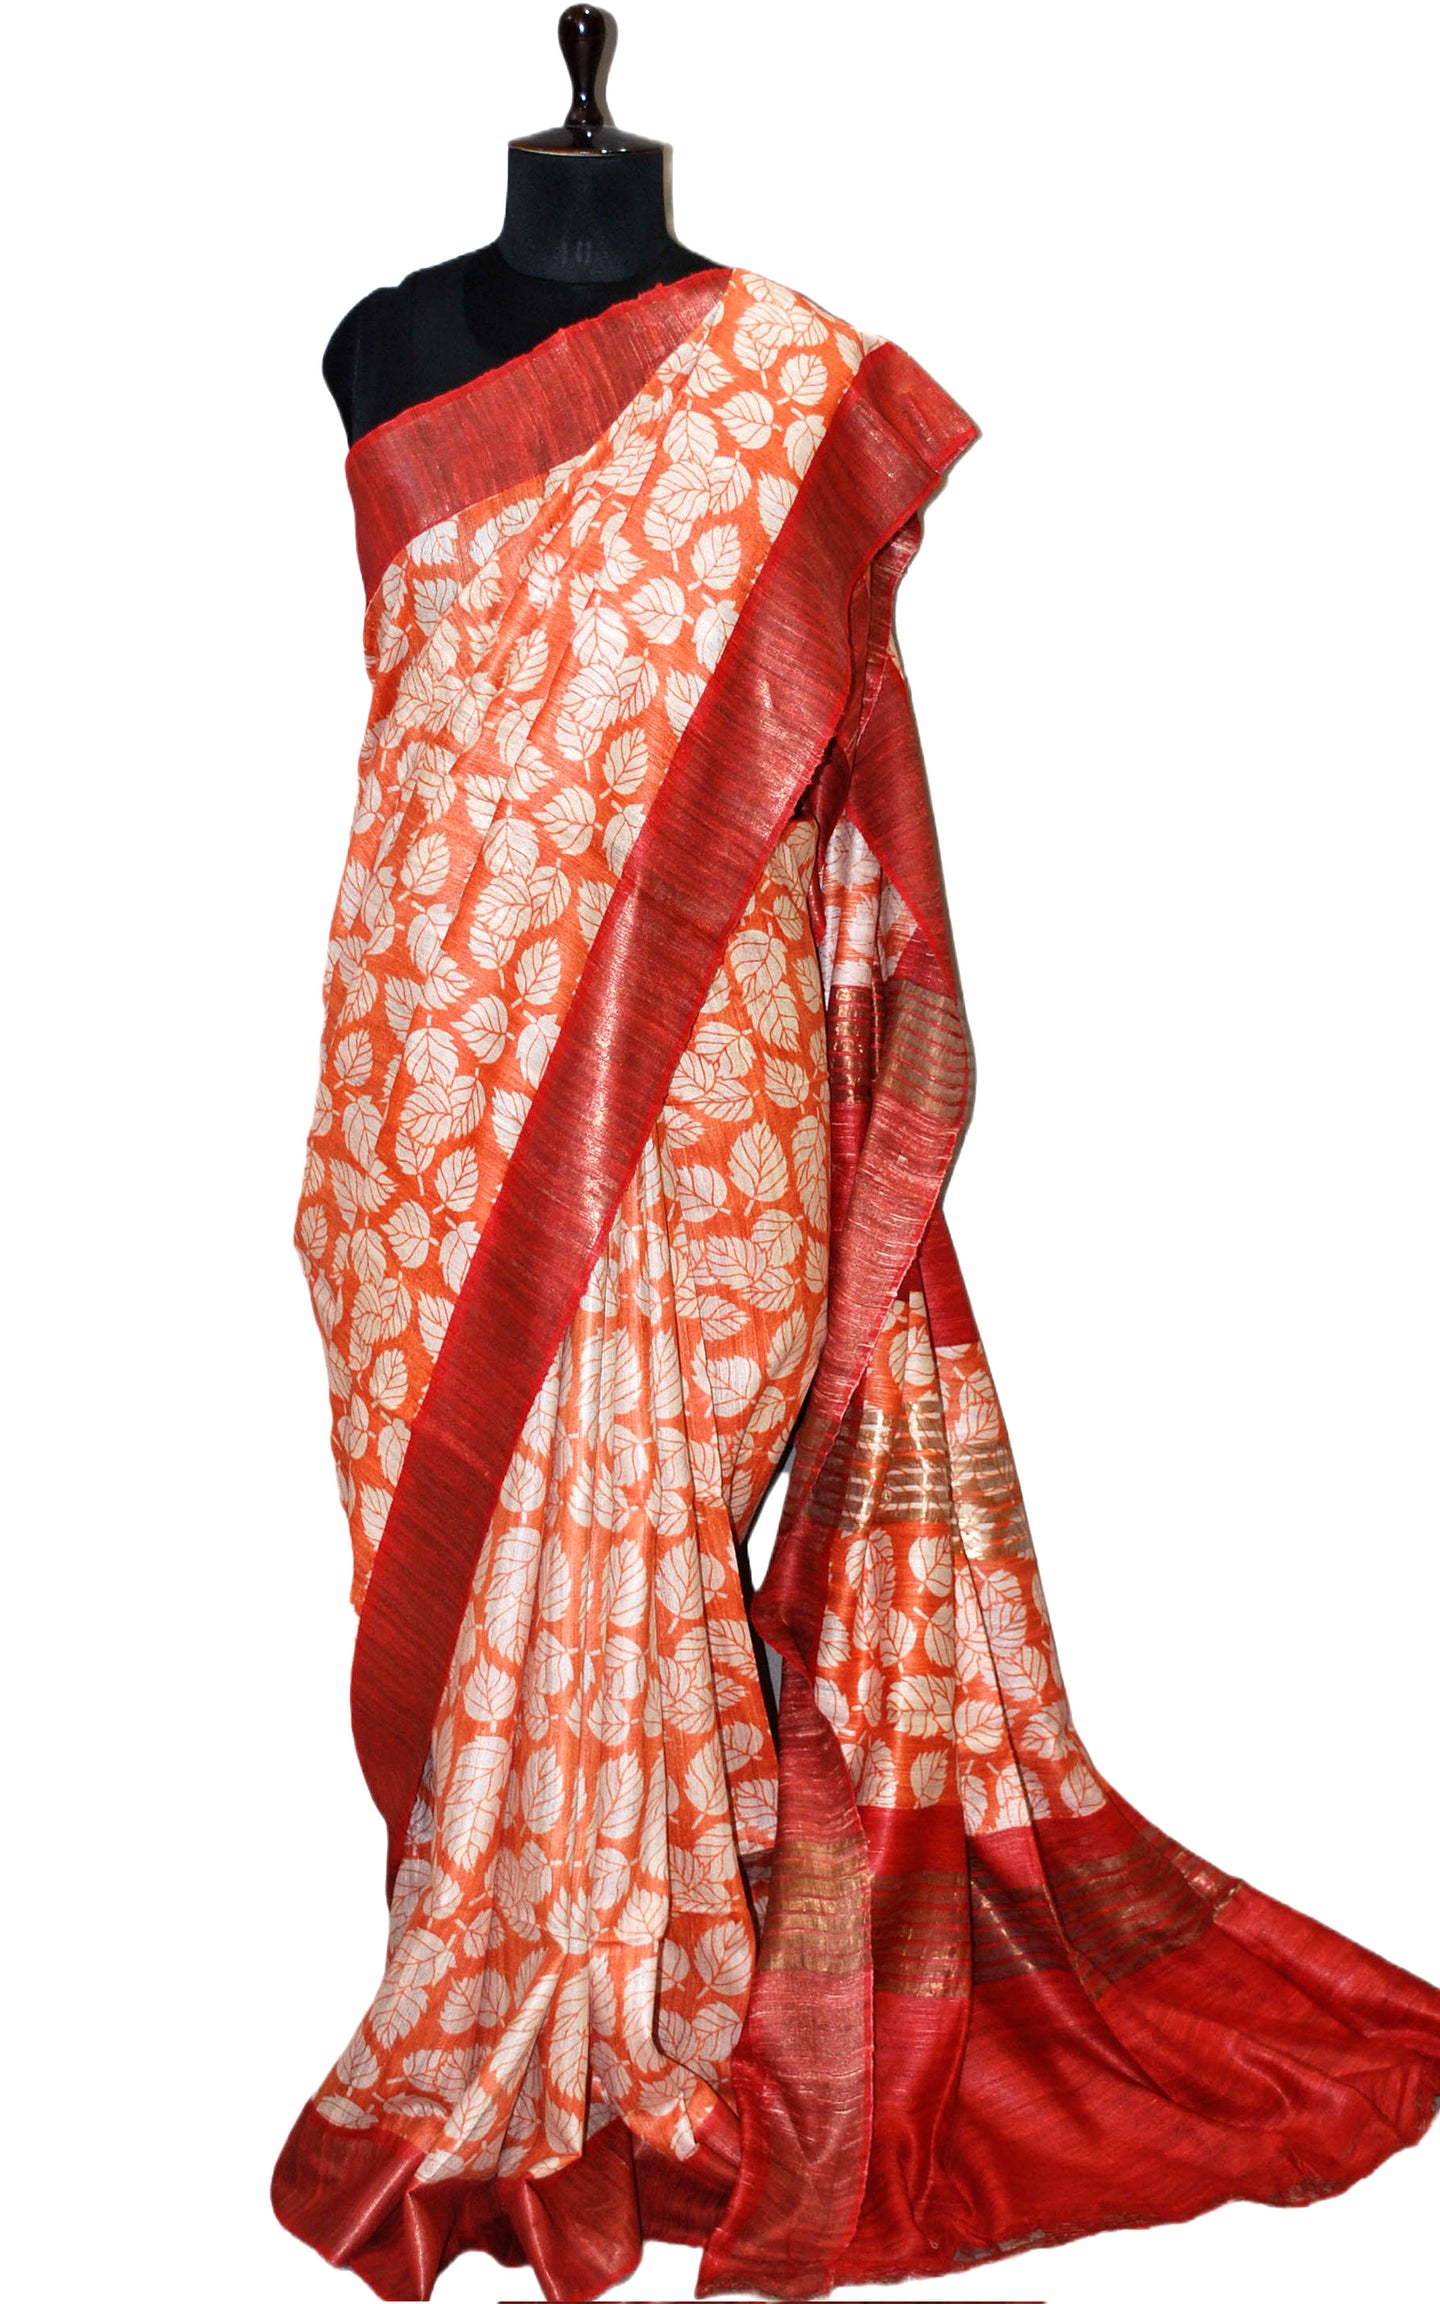 Silk Mark Certified Pure Gigha Block Printed Saree in Orange, Off White and Red